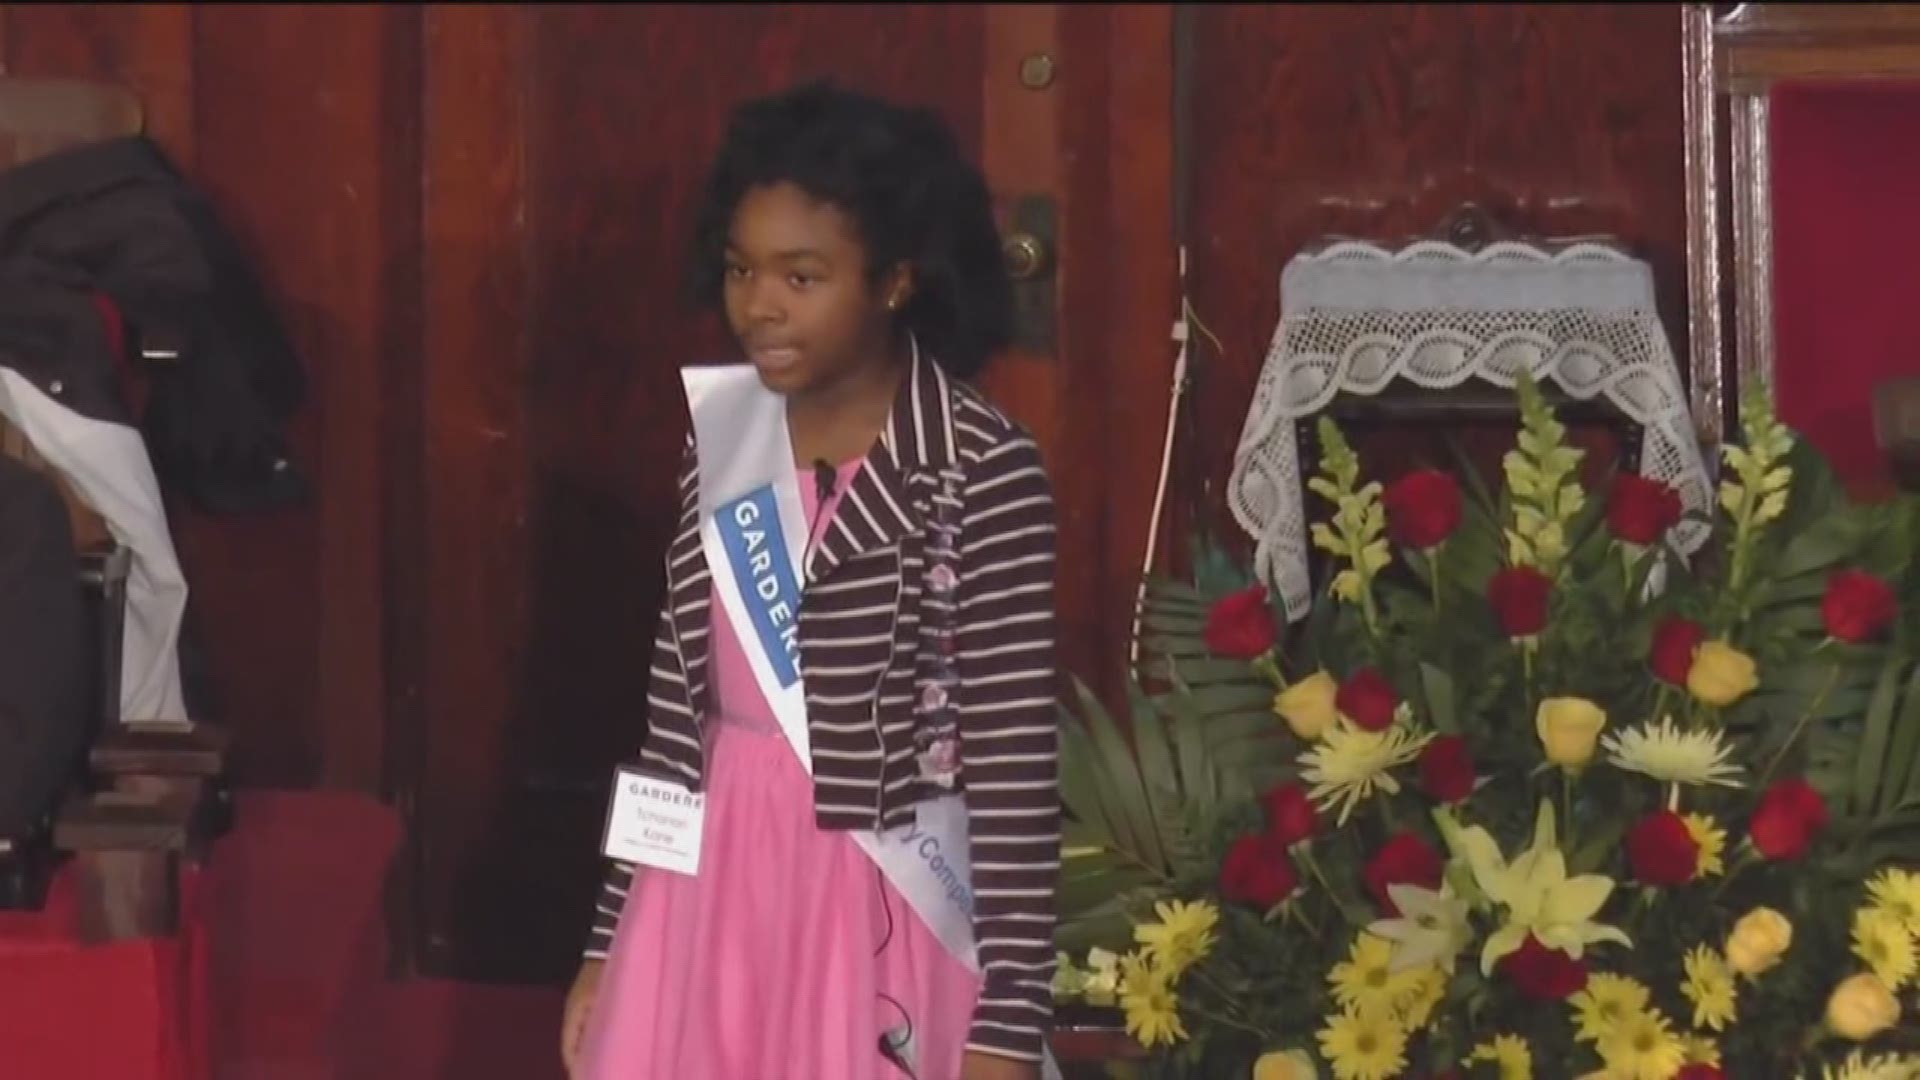 Tchanori Kone shares her dream for today's world in a winning speech from the MLK Jr. Oratory Competition.